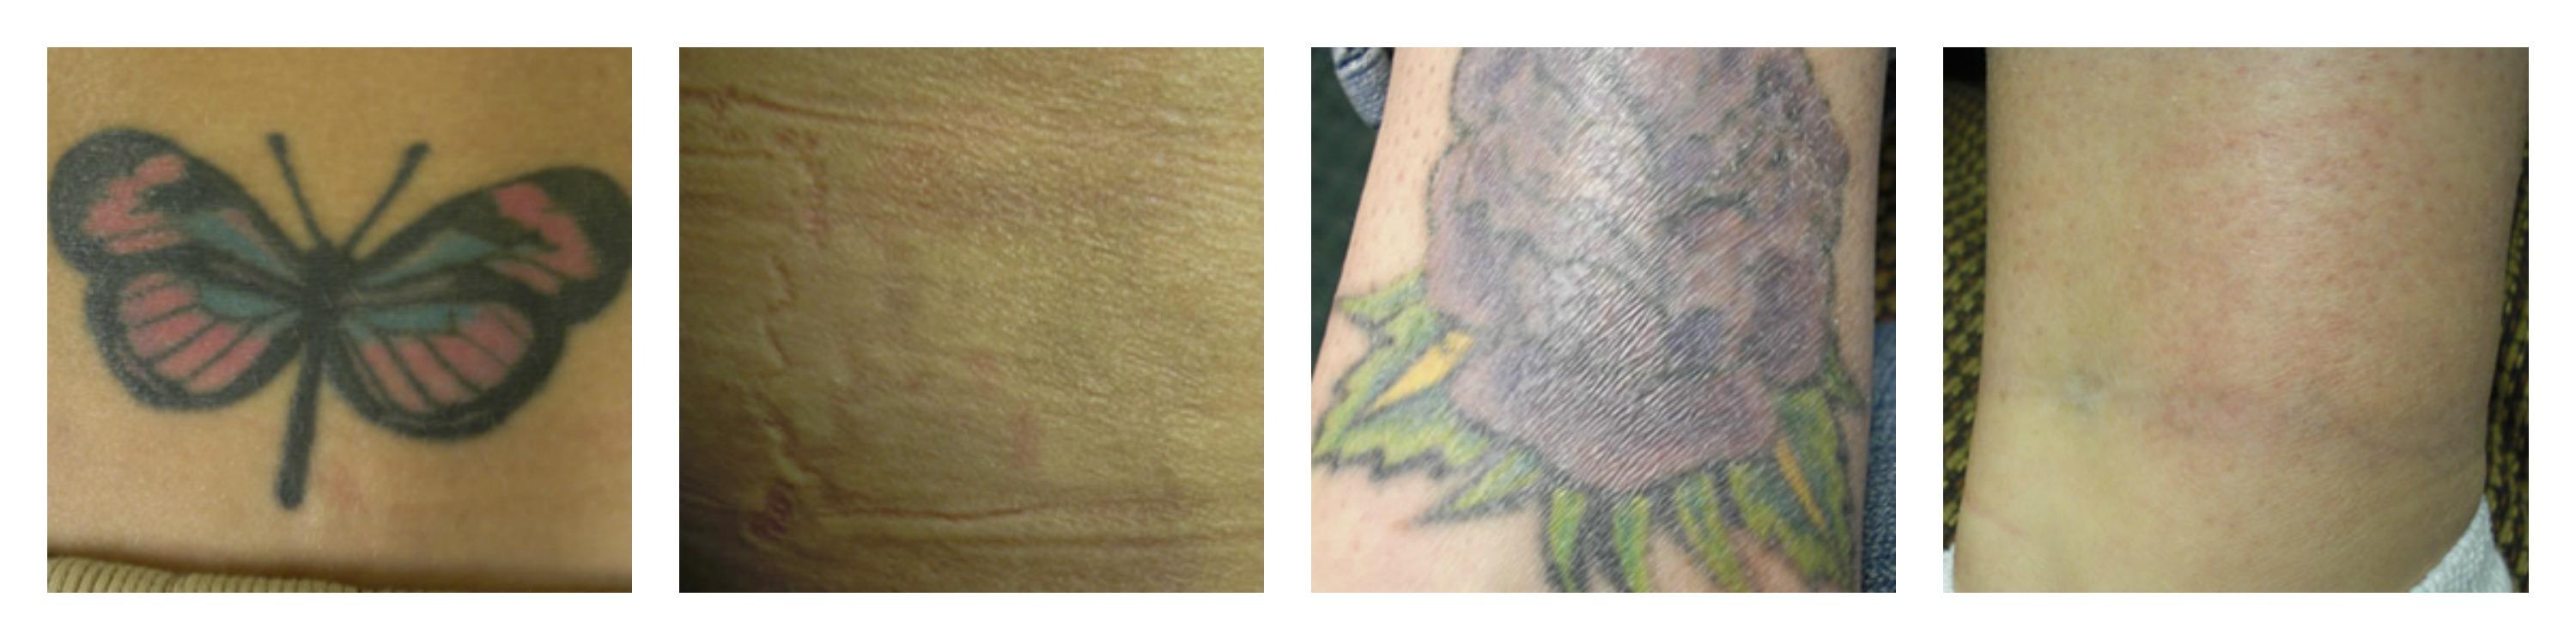 everyoung tattoo removal in port coquitlam burnaby vancouver bc q switched laser VRM